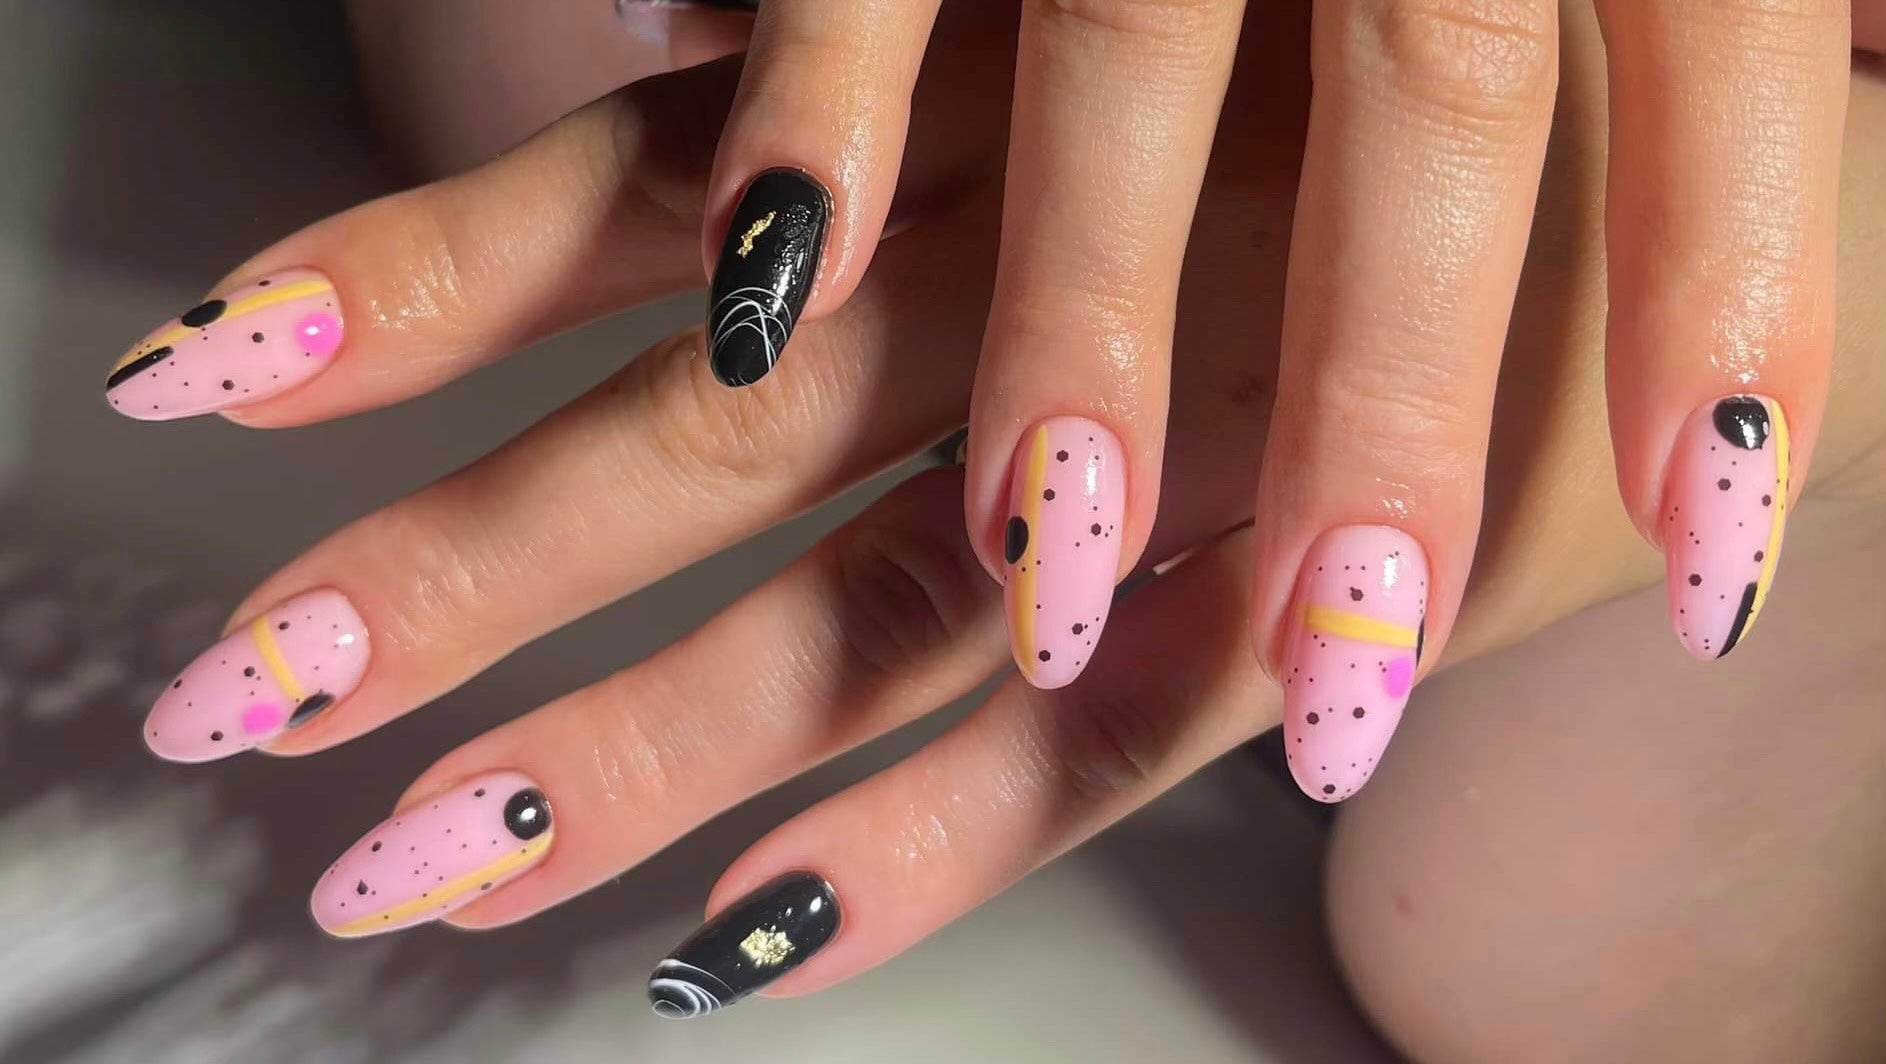 Colorful nail art designs to rock this summer!